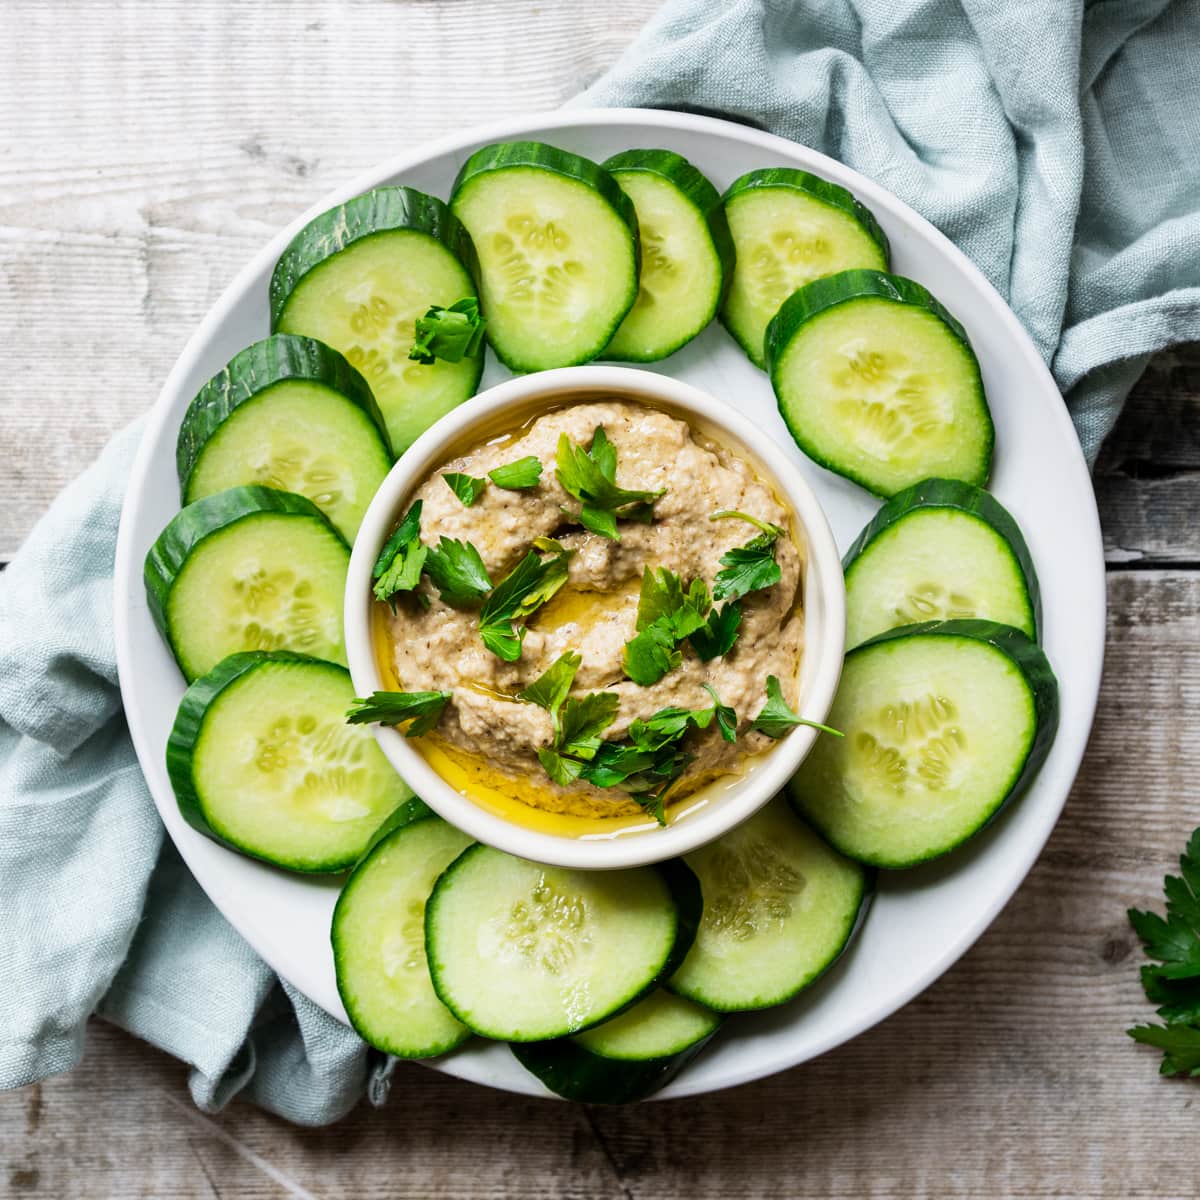 Baba ghanoush with cucumber slices